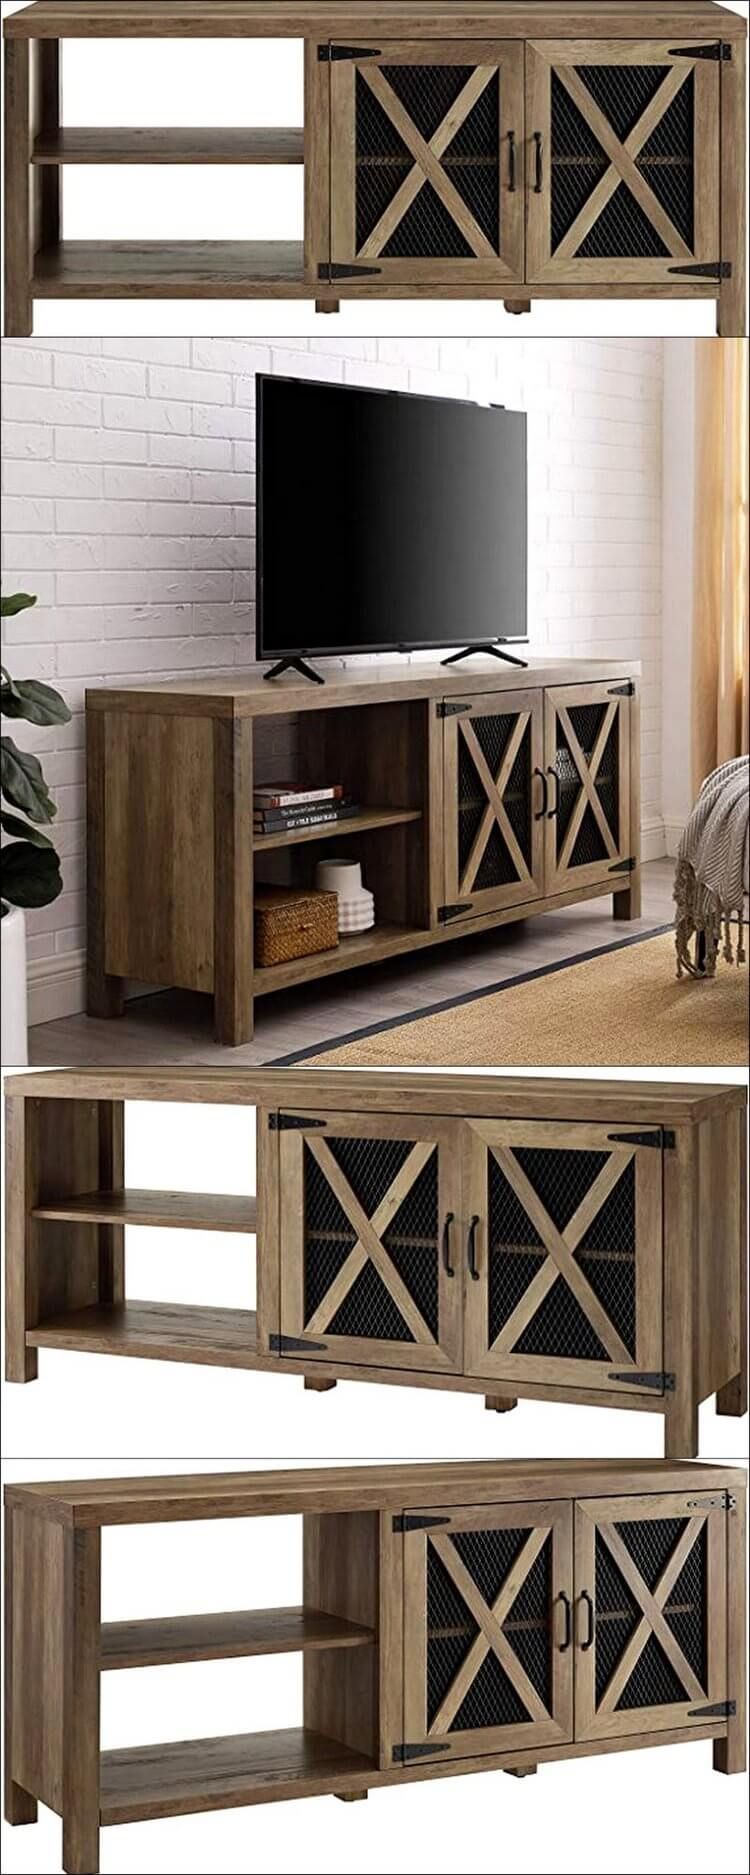 Best Rustic Tv Stands To Decor Your Living Rooms | Rustic Within Rustic Tv Stands (View 9 of 15)